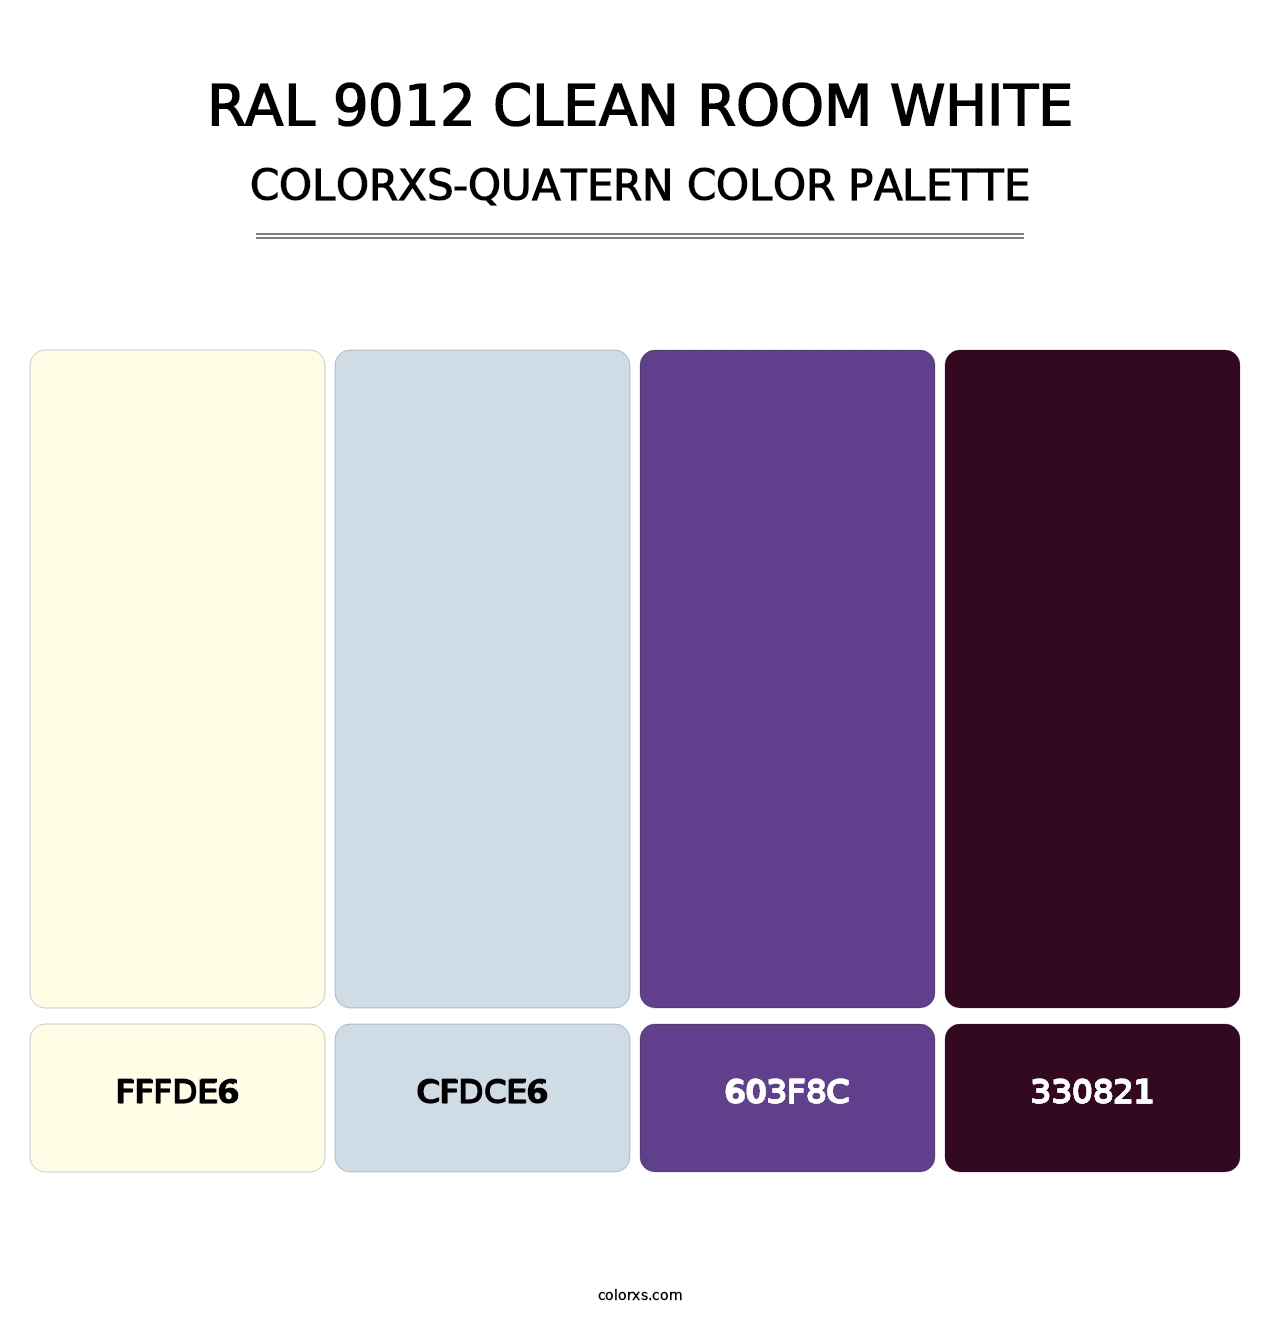 RAL 9012 Clean Room White - Colorxs Quatern Palette